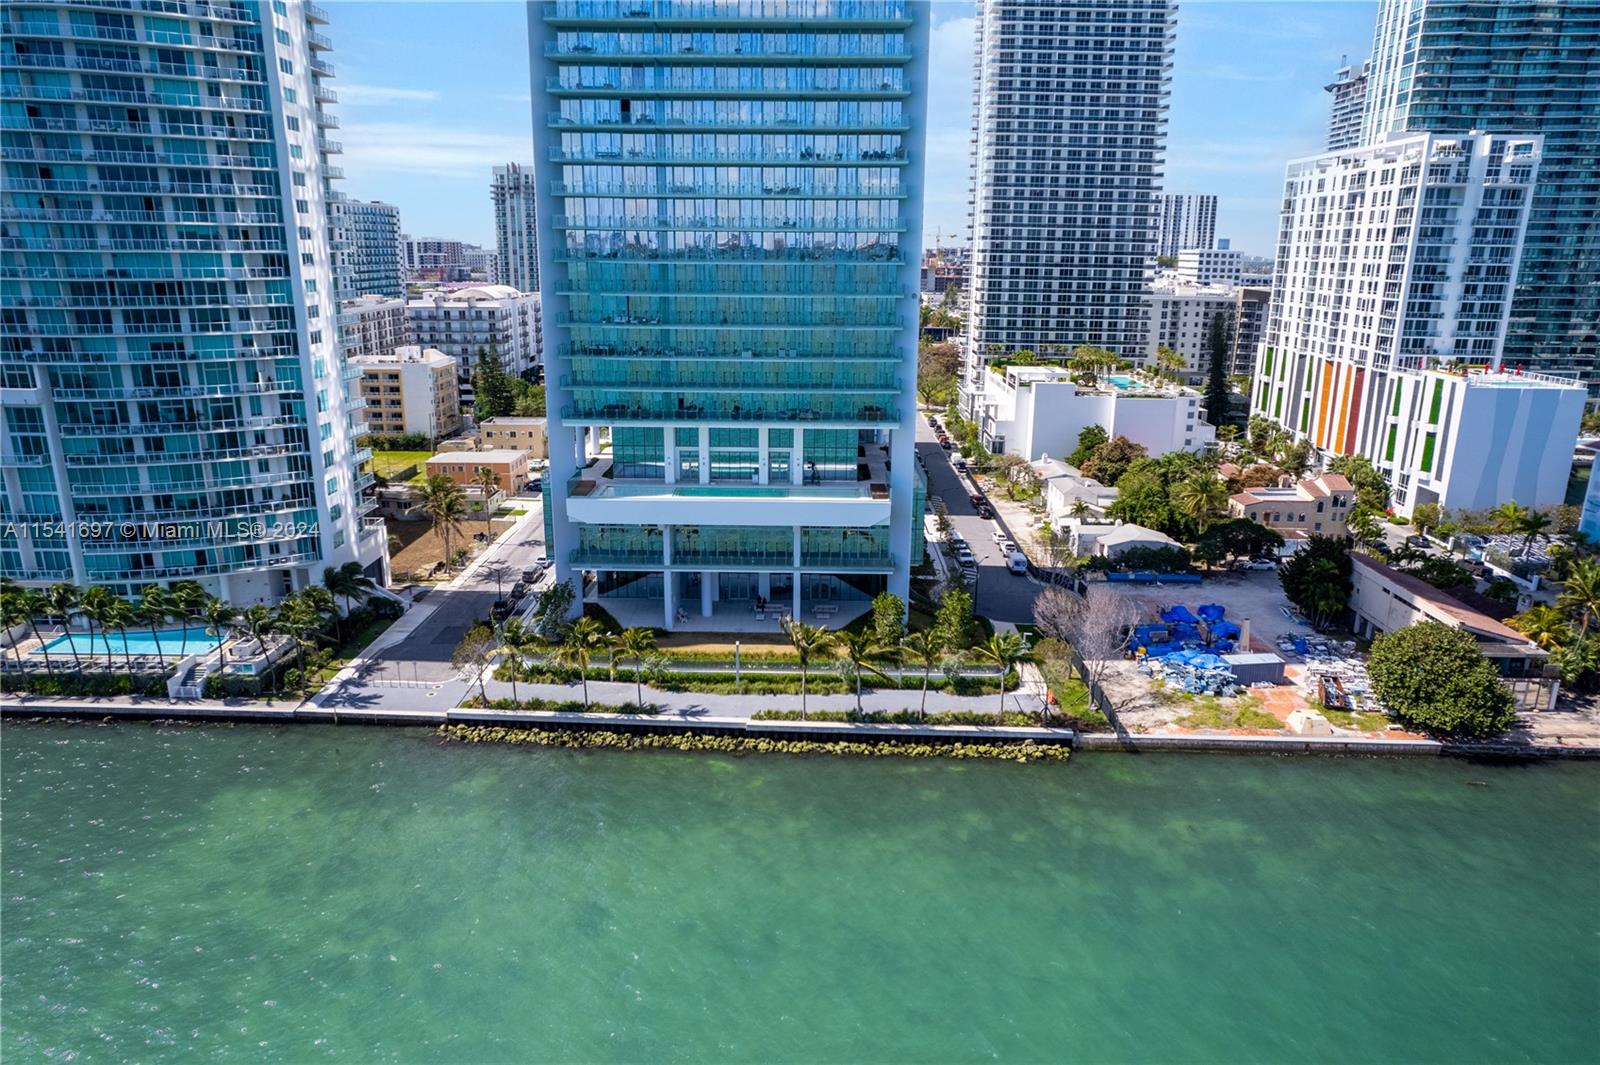 Amazing opportunity to own a residence in the prestigious Missoni Baia, situated along the waterfront in Edgewater! This 57-story luxury tower offers an array of exceptional amenities, including an Olympic-sized pool, a relaxing lounge pool, a dedicated nail salon, a stylish clubroom, a fun children's playroom, a pampering dog spa, private cabanas, and tennis courts. Residents also have privileged access to the bayfront terrace, which boasts an infinity-edge pool, a state-of-the-art fitness center, and a serene wellness spa, perfect for families seeking tranquility within reach of Miami's vibrant lifestyle. Units feature elegant marble floors and countertops, stunning bay and city views, and high-end appliances.